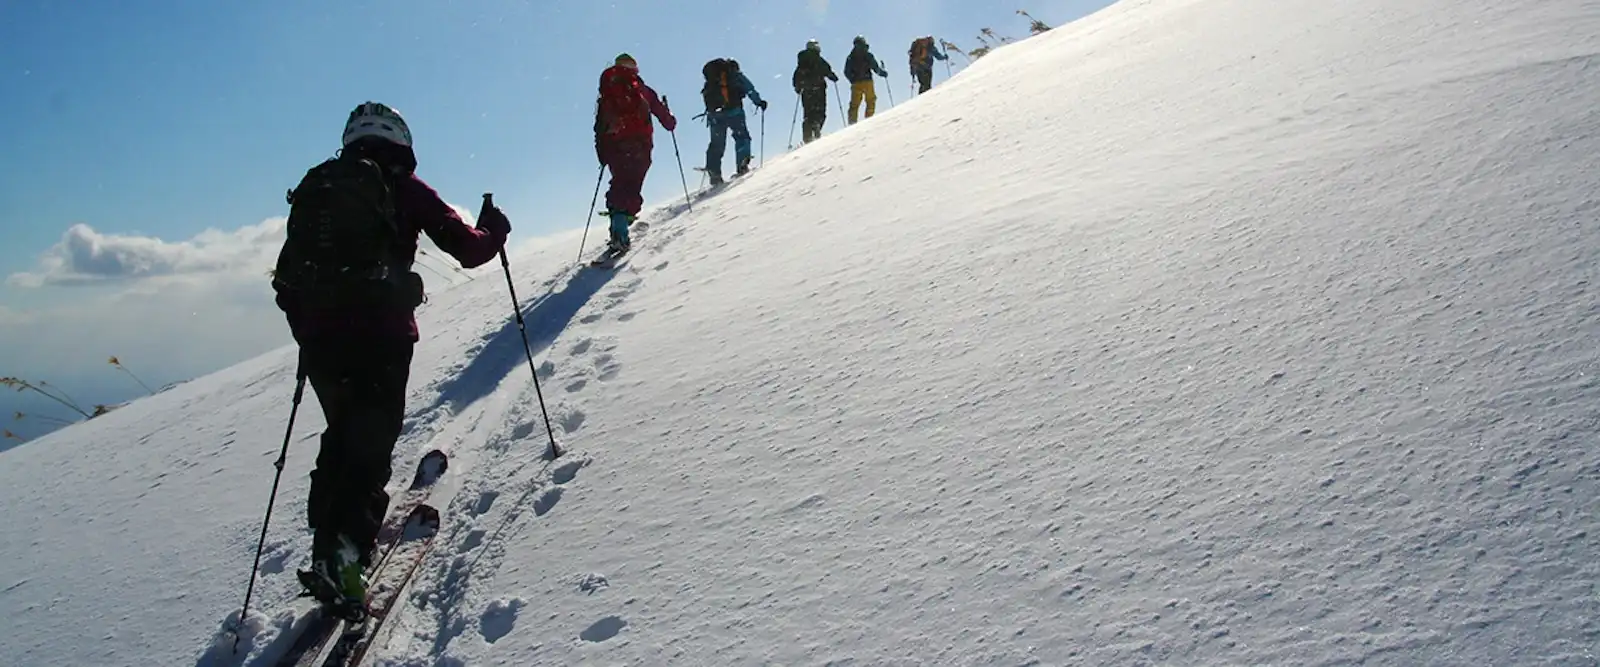 Discover Rishiri, the ultimate backcountry skiing destination in Japan post image